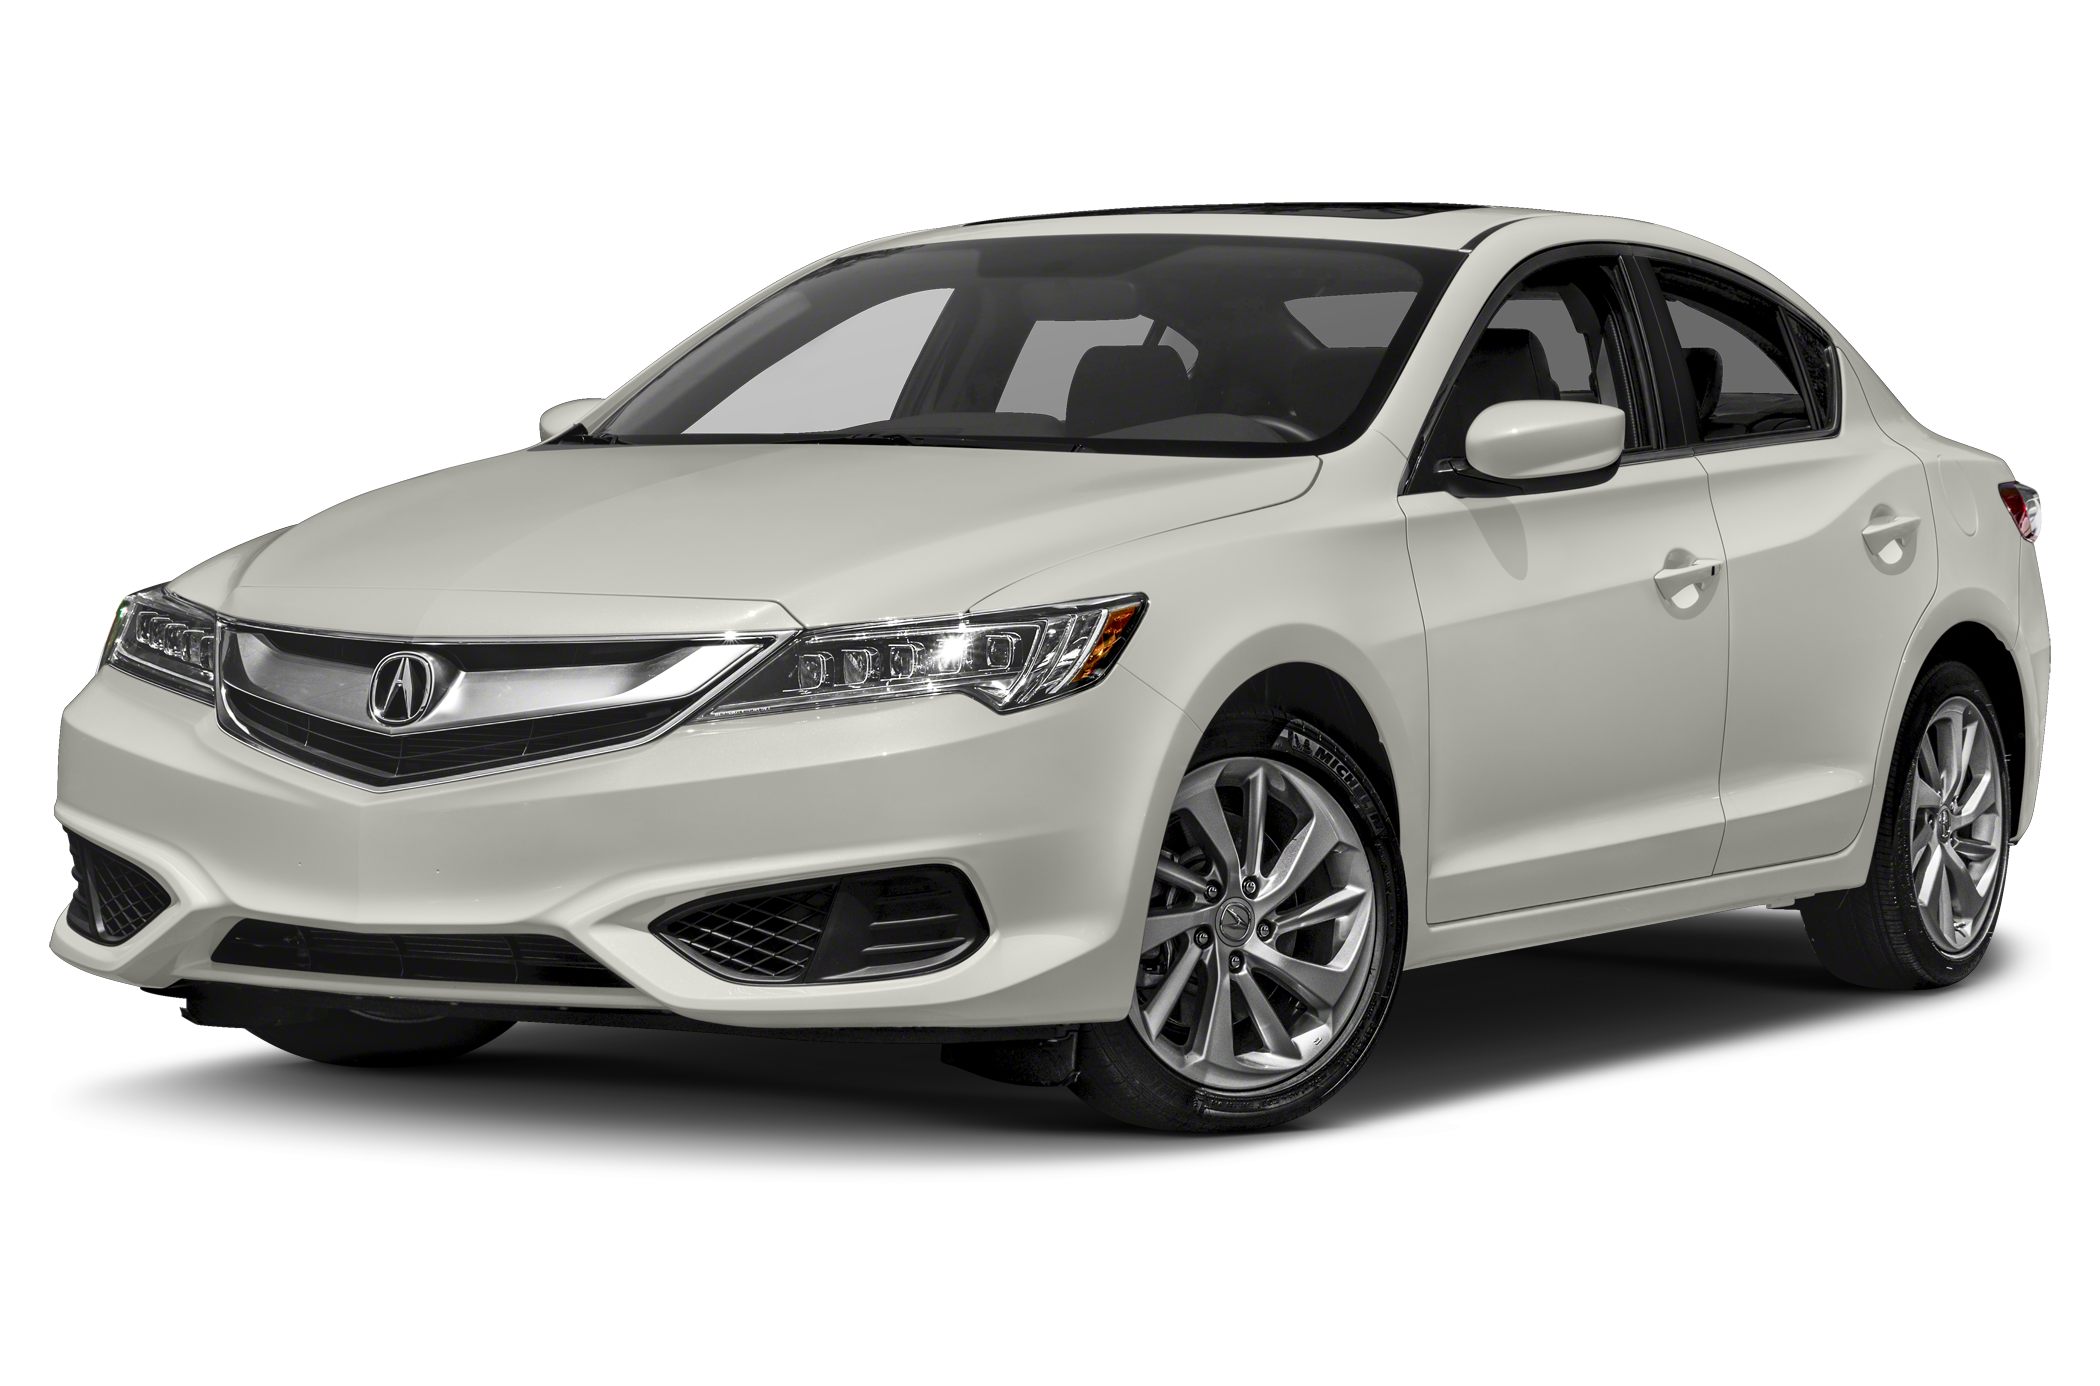 Acura Ilx Wallpapers Vehicles Hq Acura Ilx Pictures 4k Wallpapers 2019